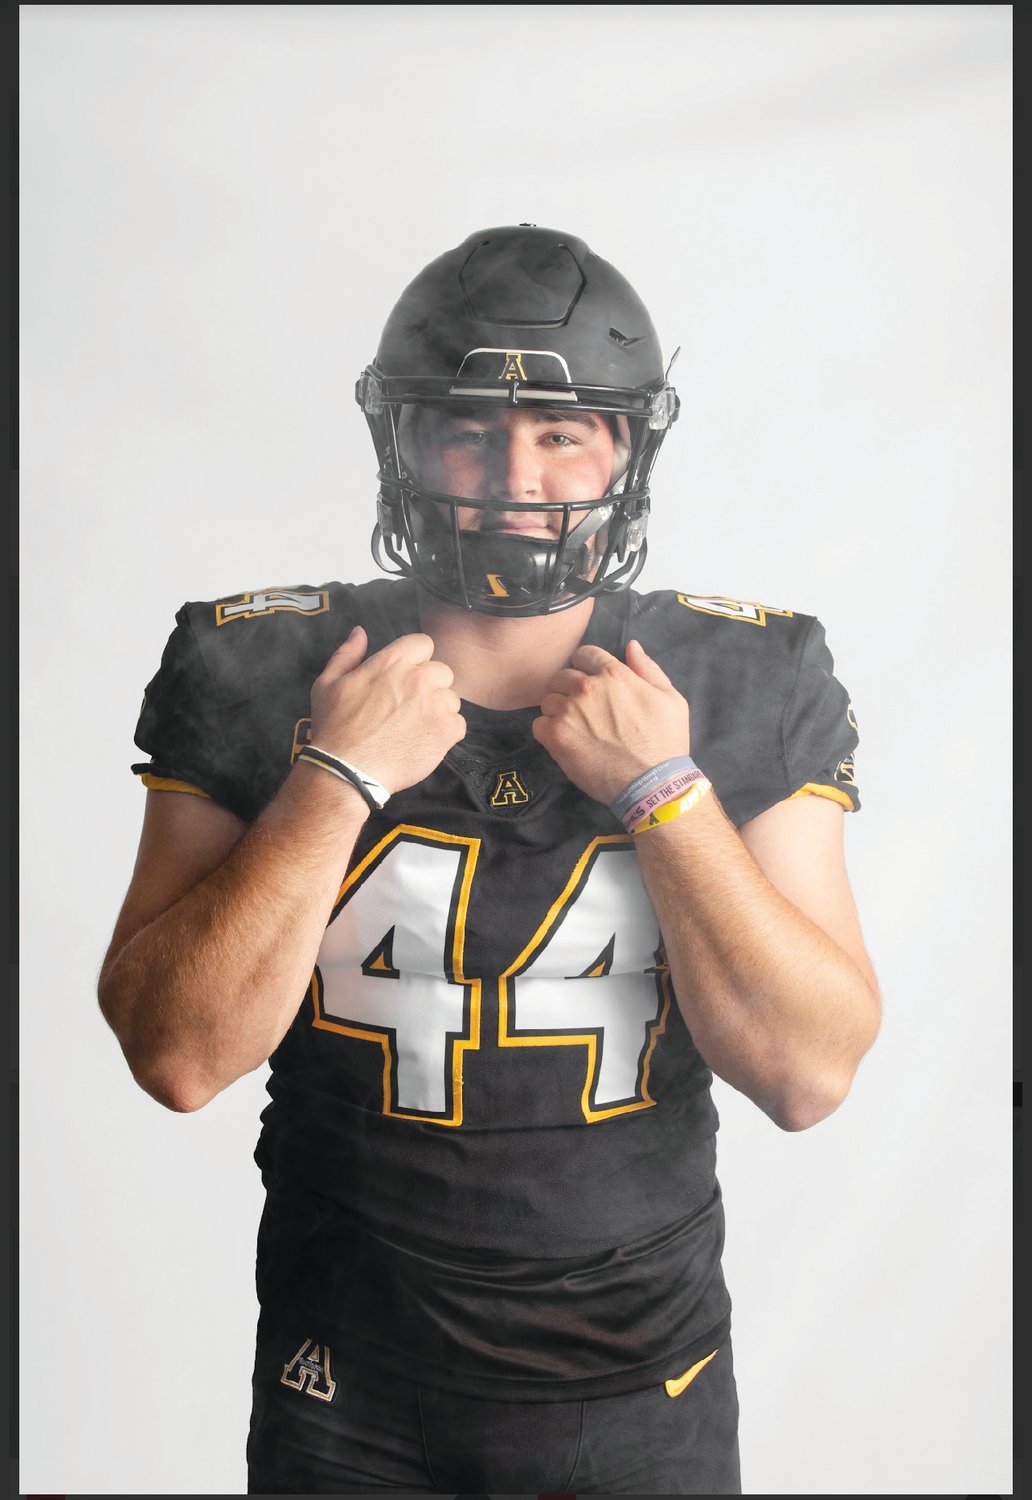 Sophomore long snapper Jake Mann poses in his Appalachian State uniform during media day. Mann transferred from Oklahoma to App. State in June.